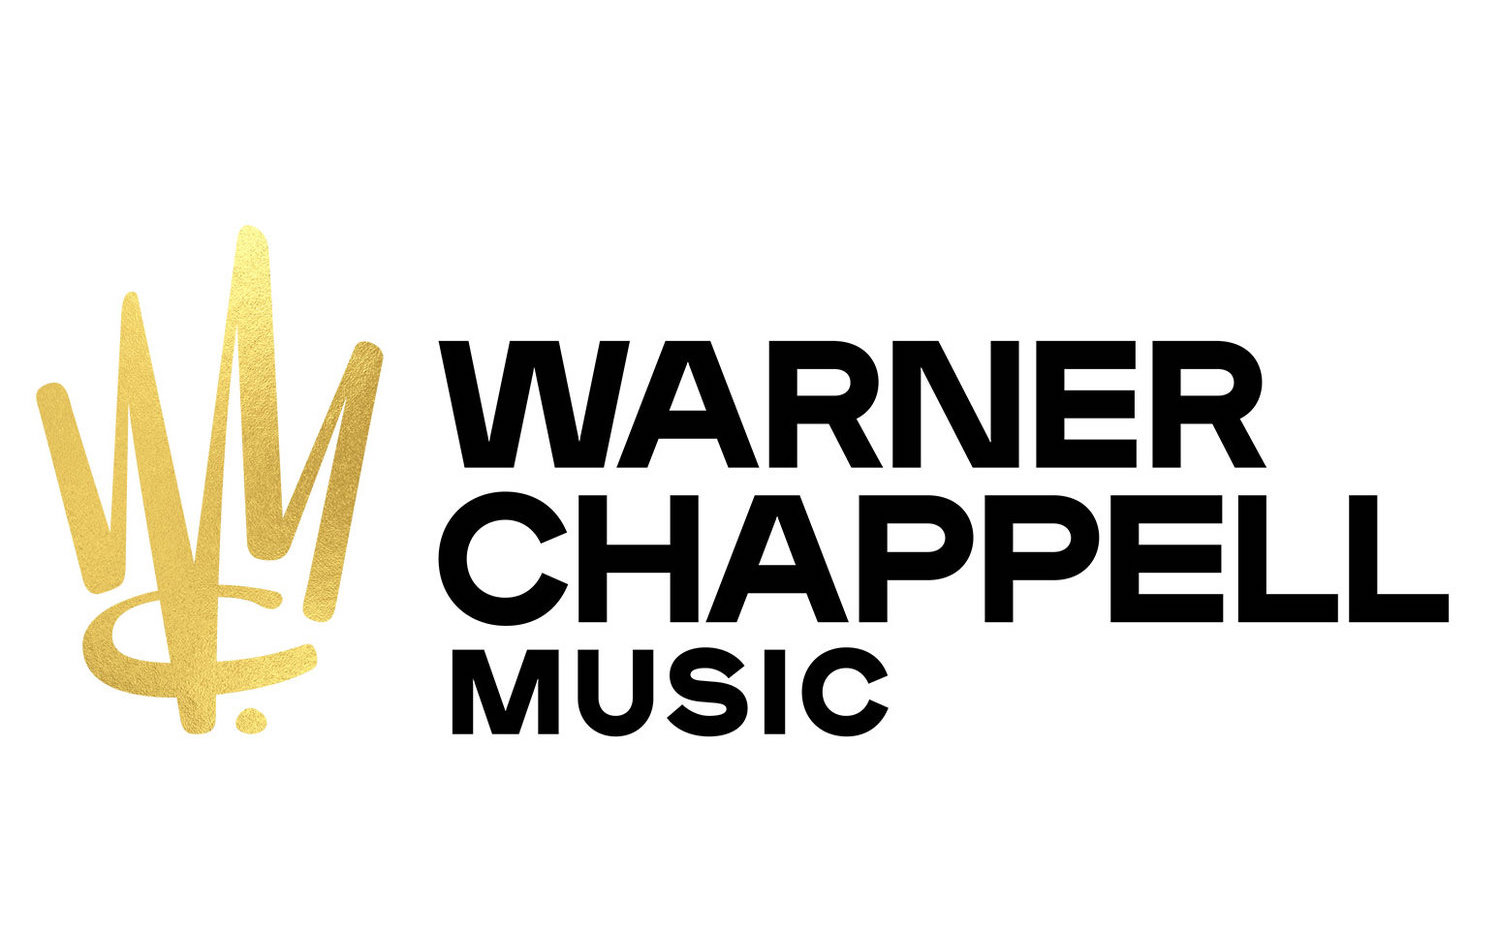 Warner Chappell Music enters “new era” with rebrand and new logo